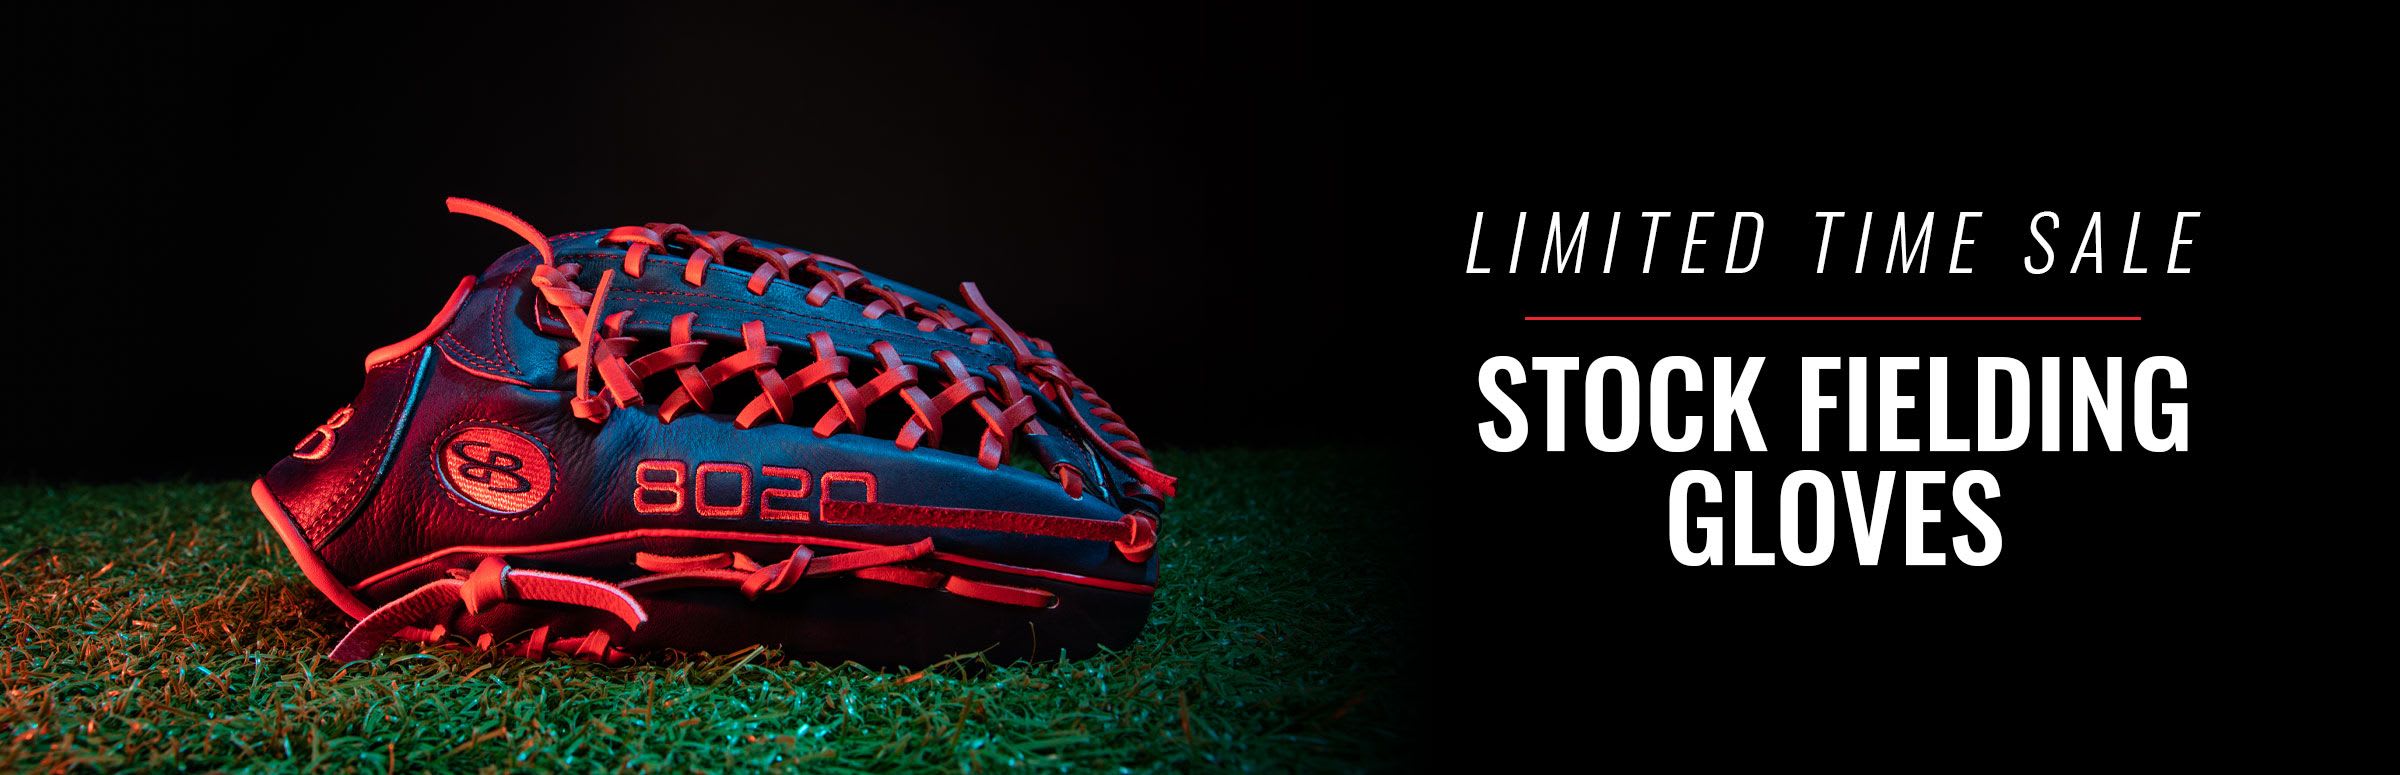 Limited Time Sale - Stock Fielding Gloves